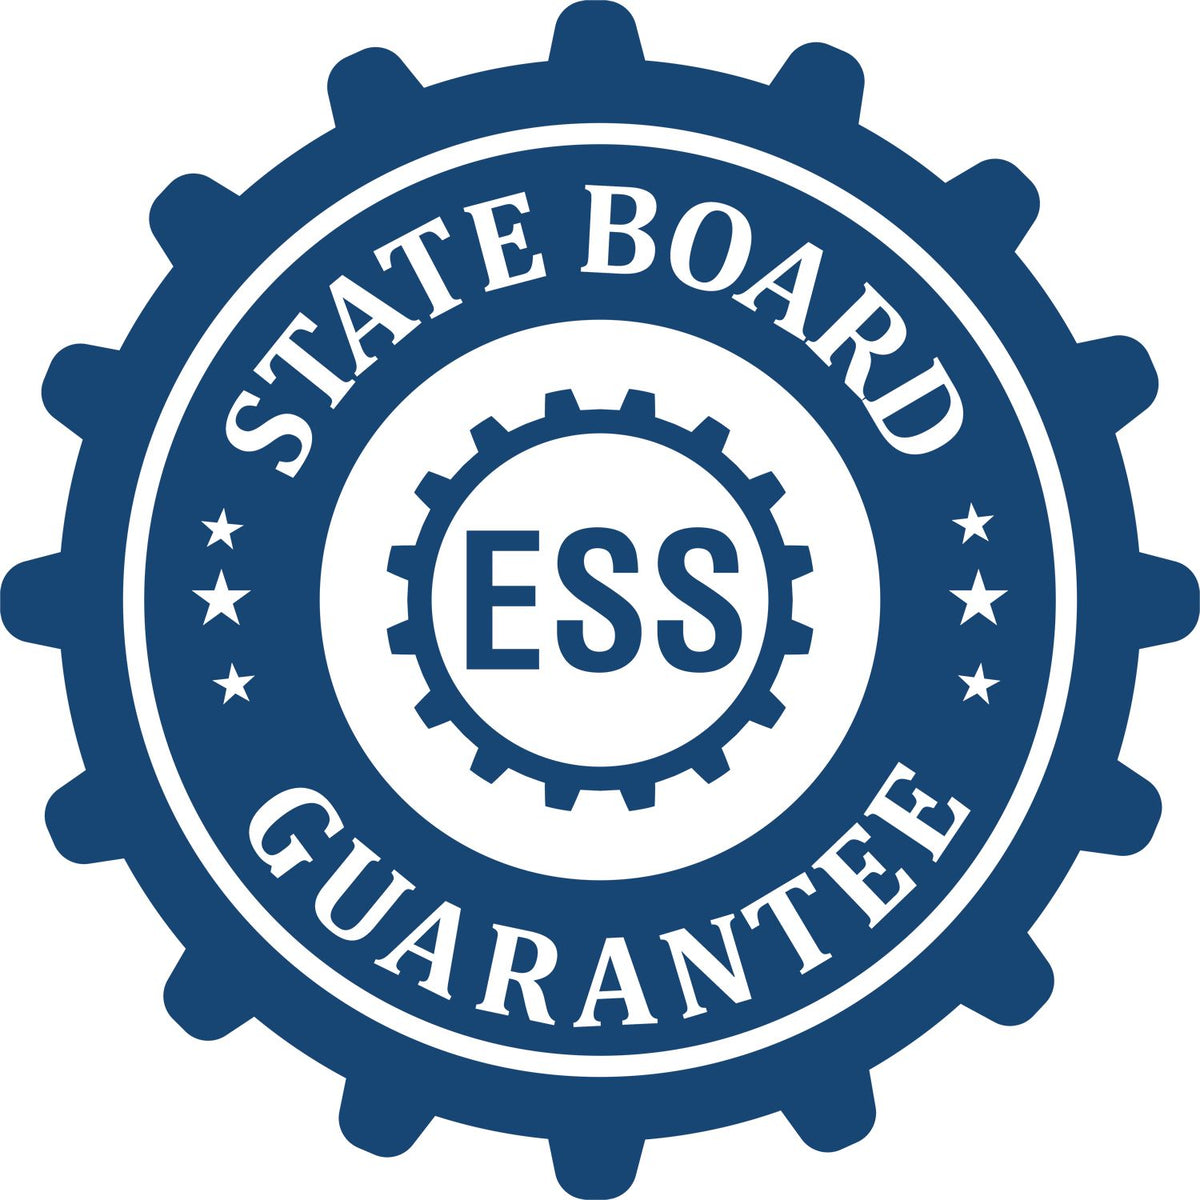 An emblem in a gear shape illustrating a state board guarantee for the Heavy Duty Cast Iron Arizona Engineer Seal Embosser product.